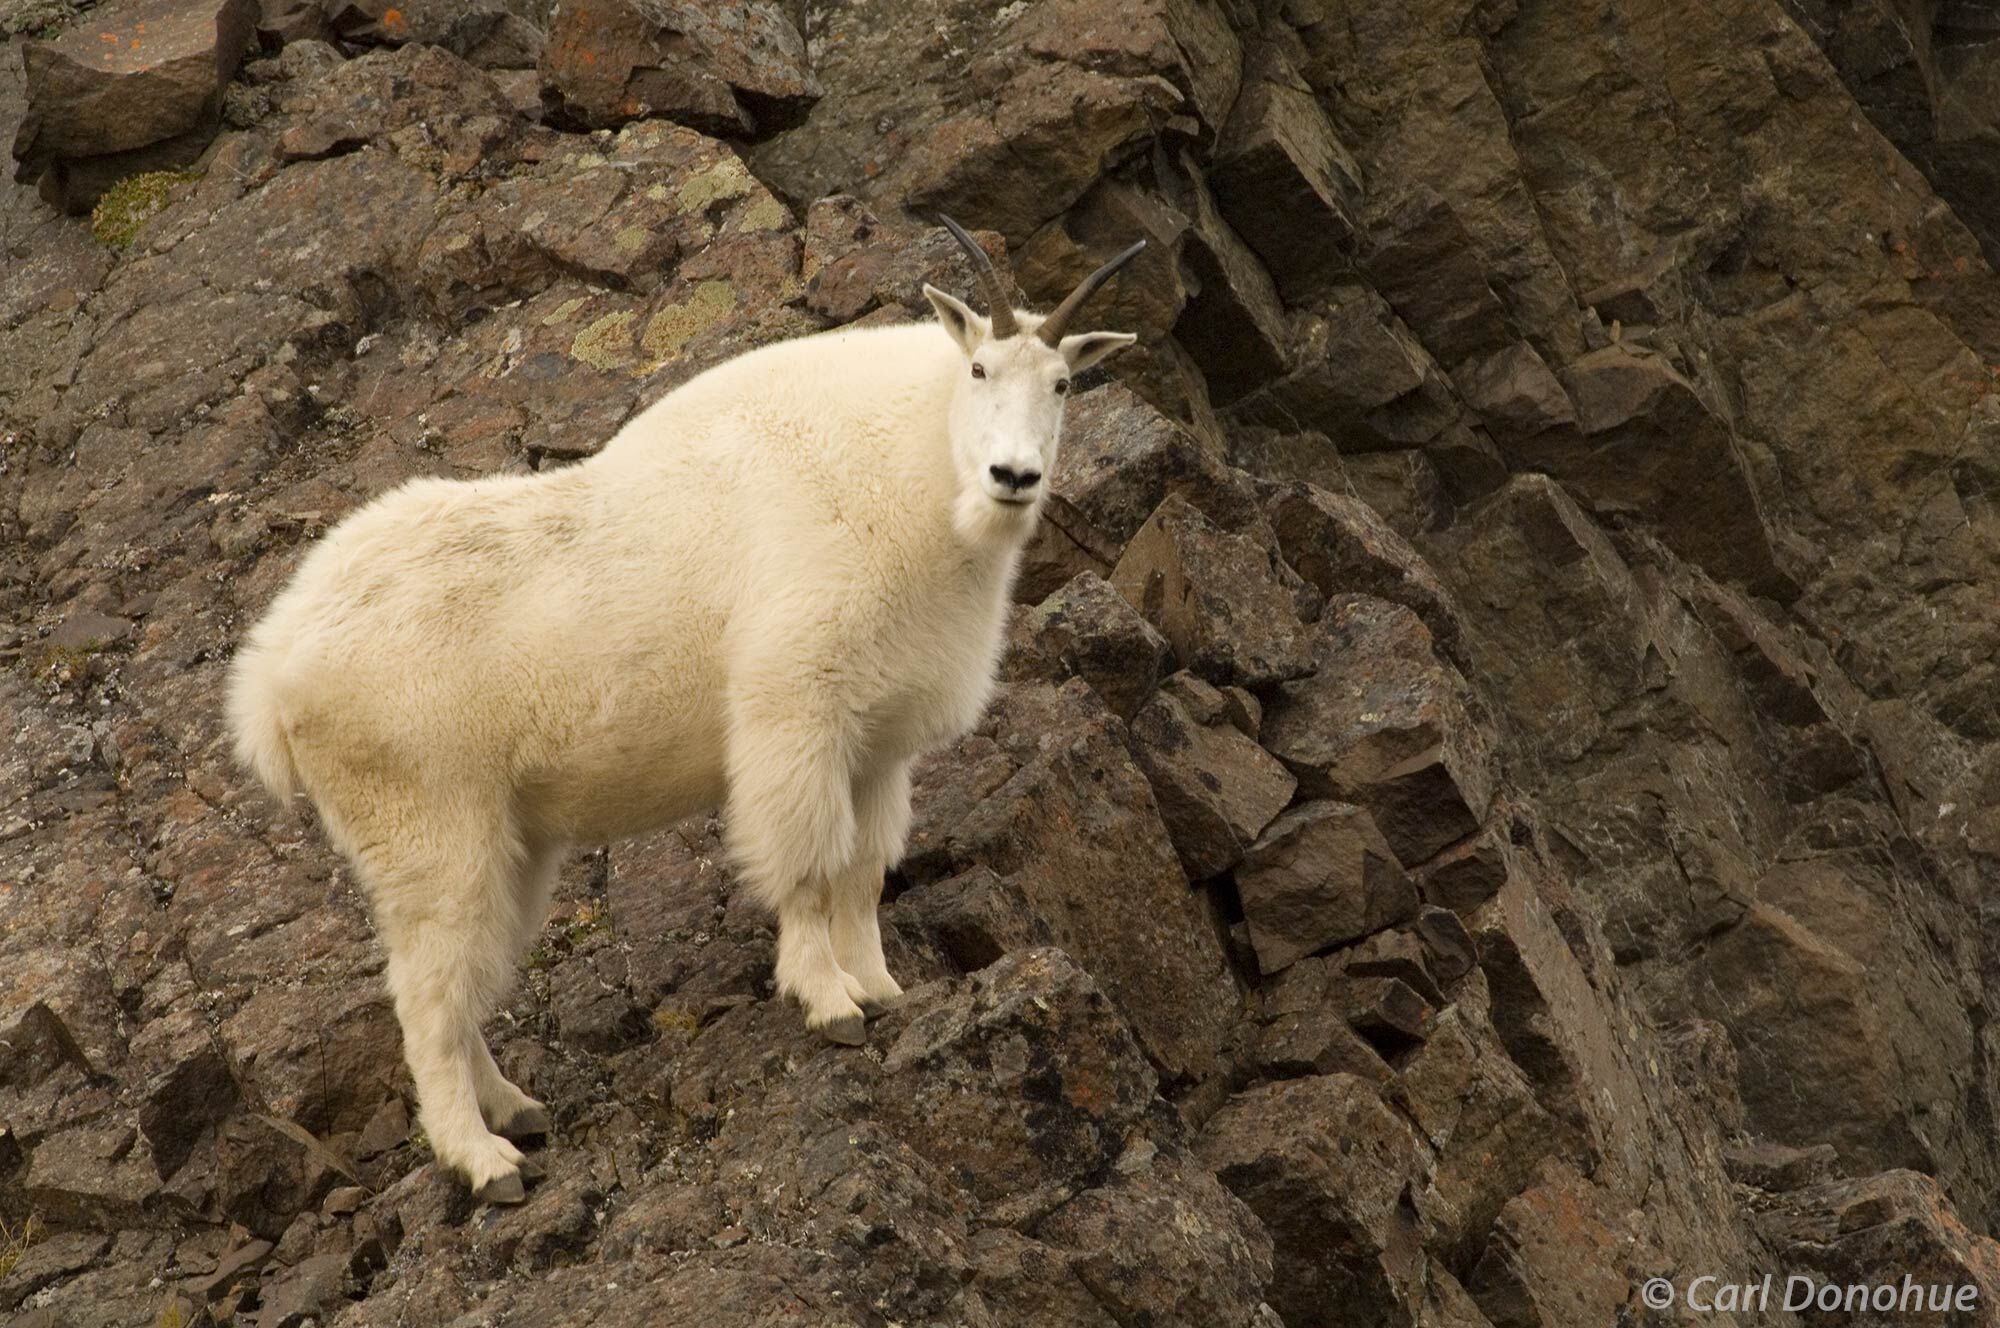 The mountain goat is an important part of the ecosystem of Wrangell-St. Elias National Park, and plays a crucial role in the...